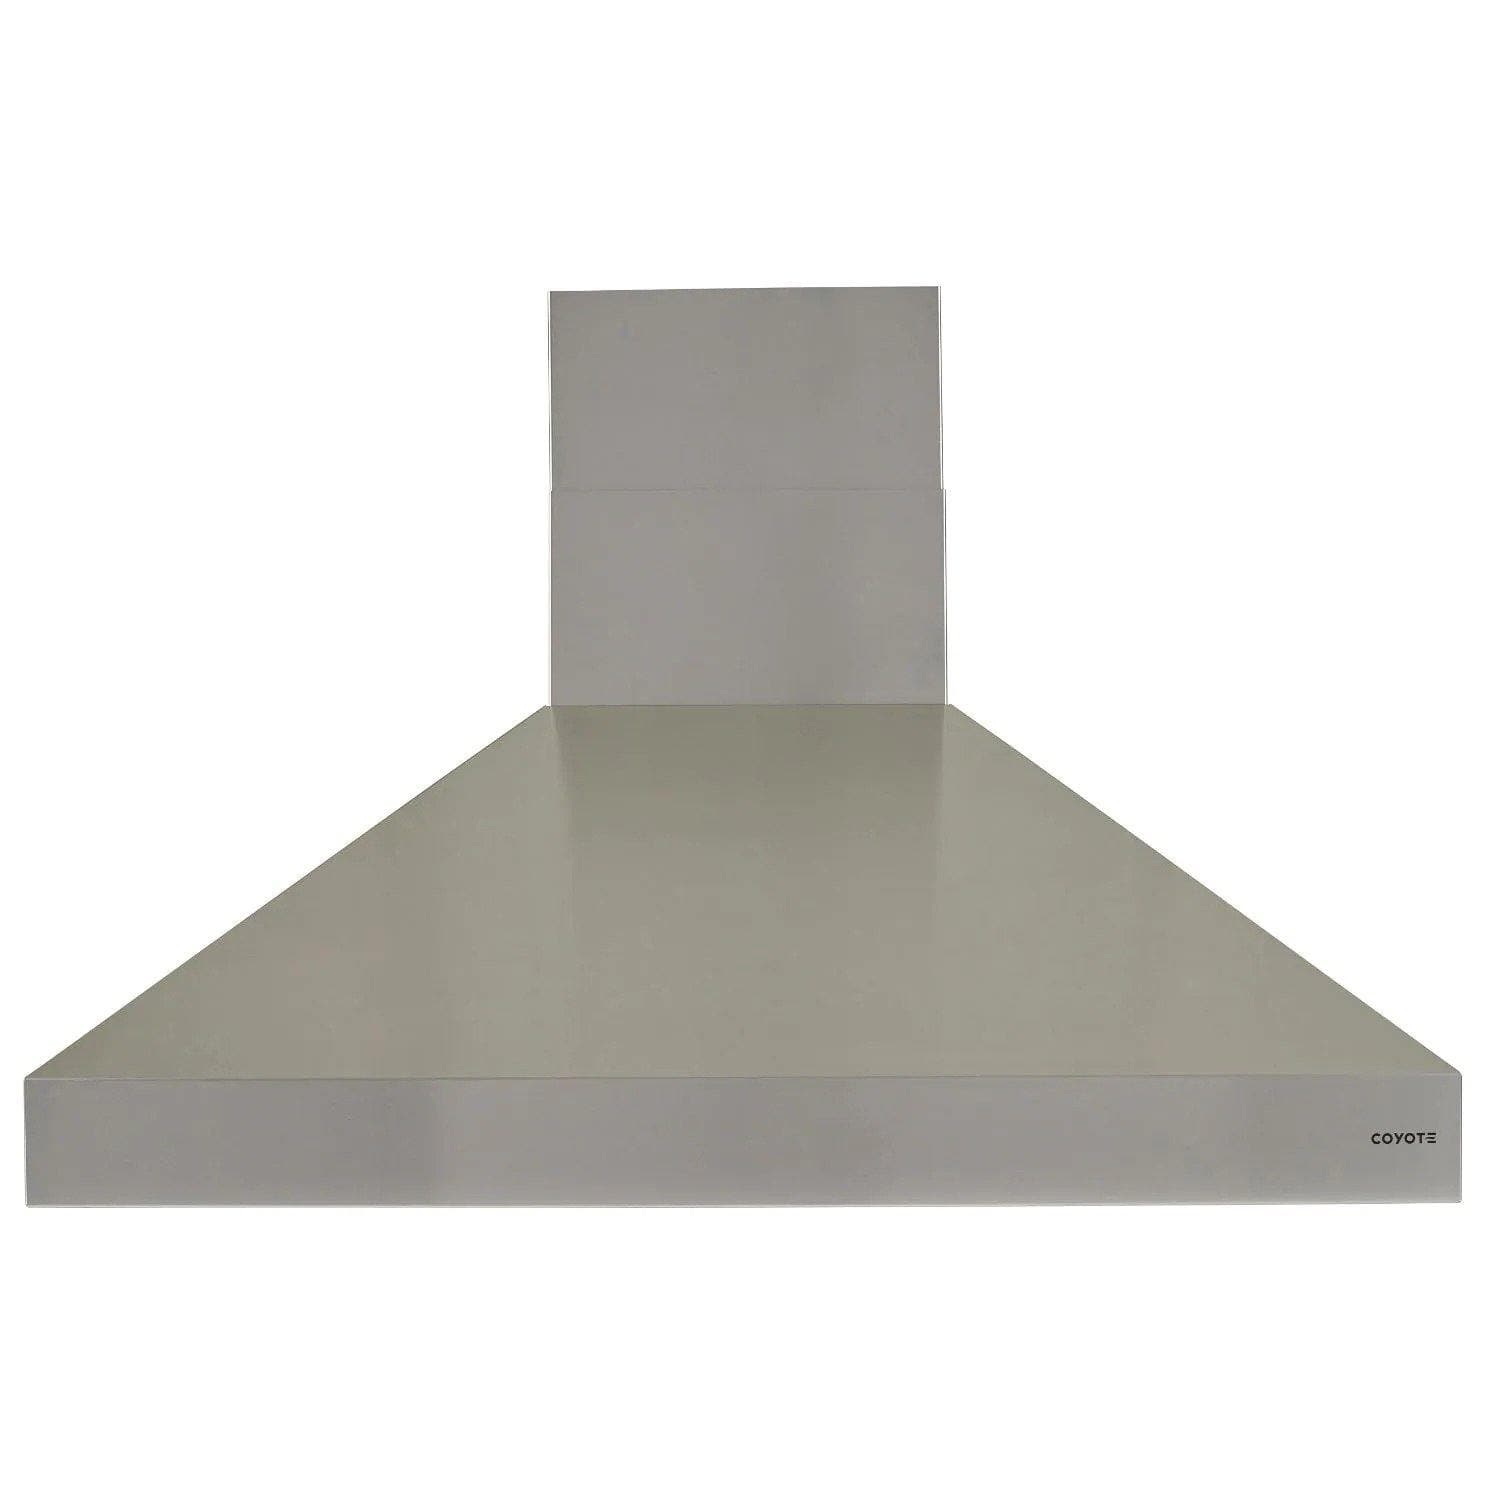 Coyote Flue Coyote - Low Flue (for ceilings 8' - 8'6" in height)